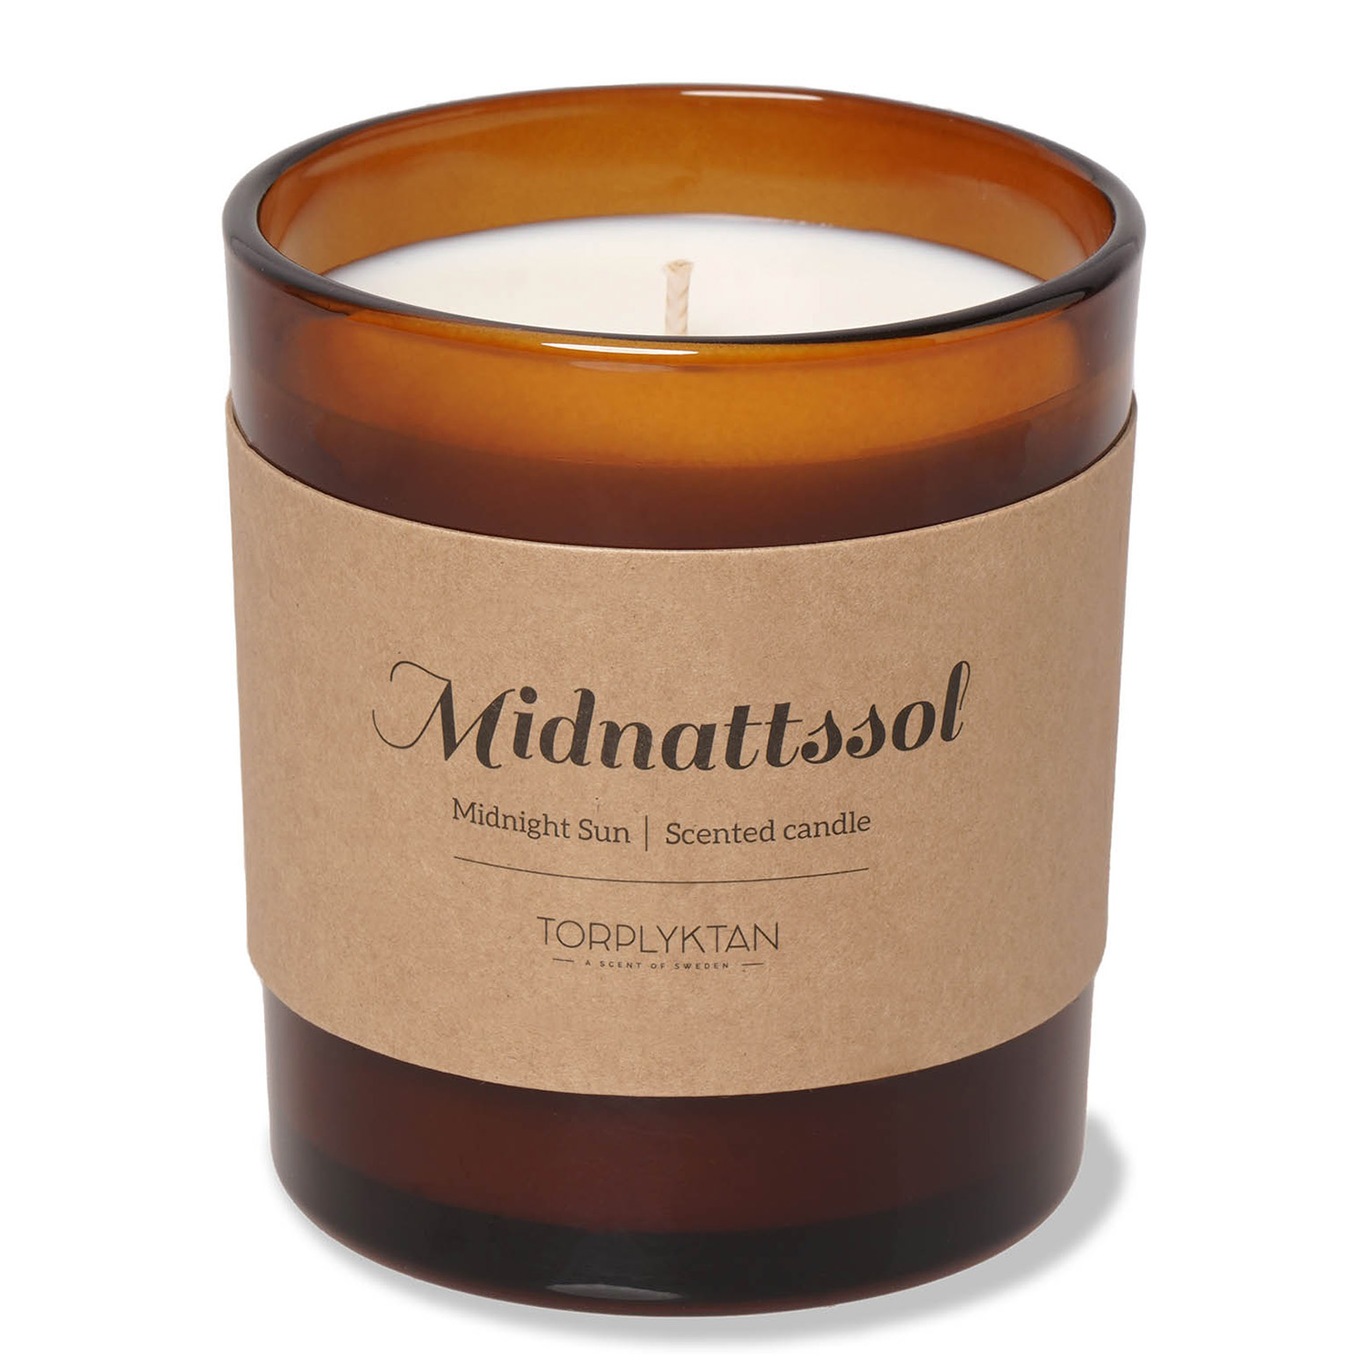 Midnattssol Scented Candle 310 g With Lid